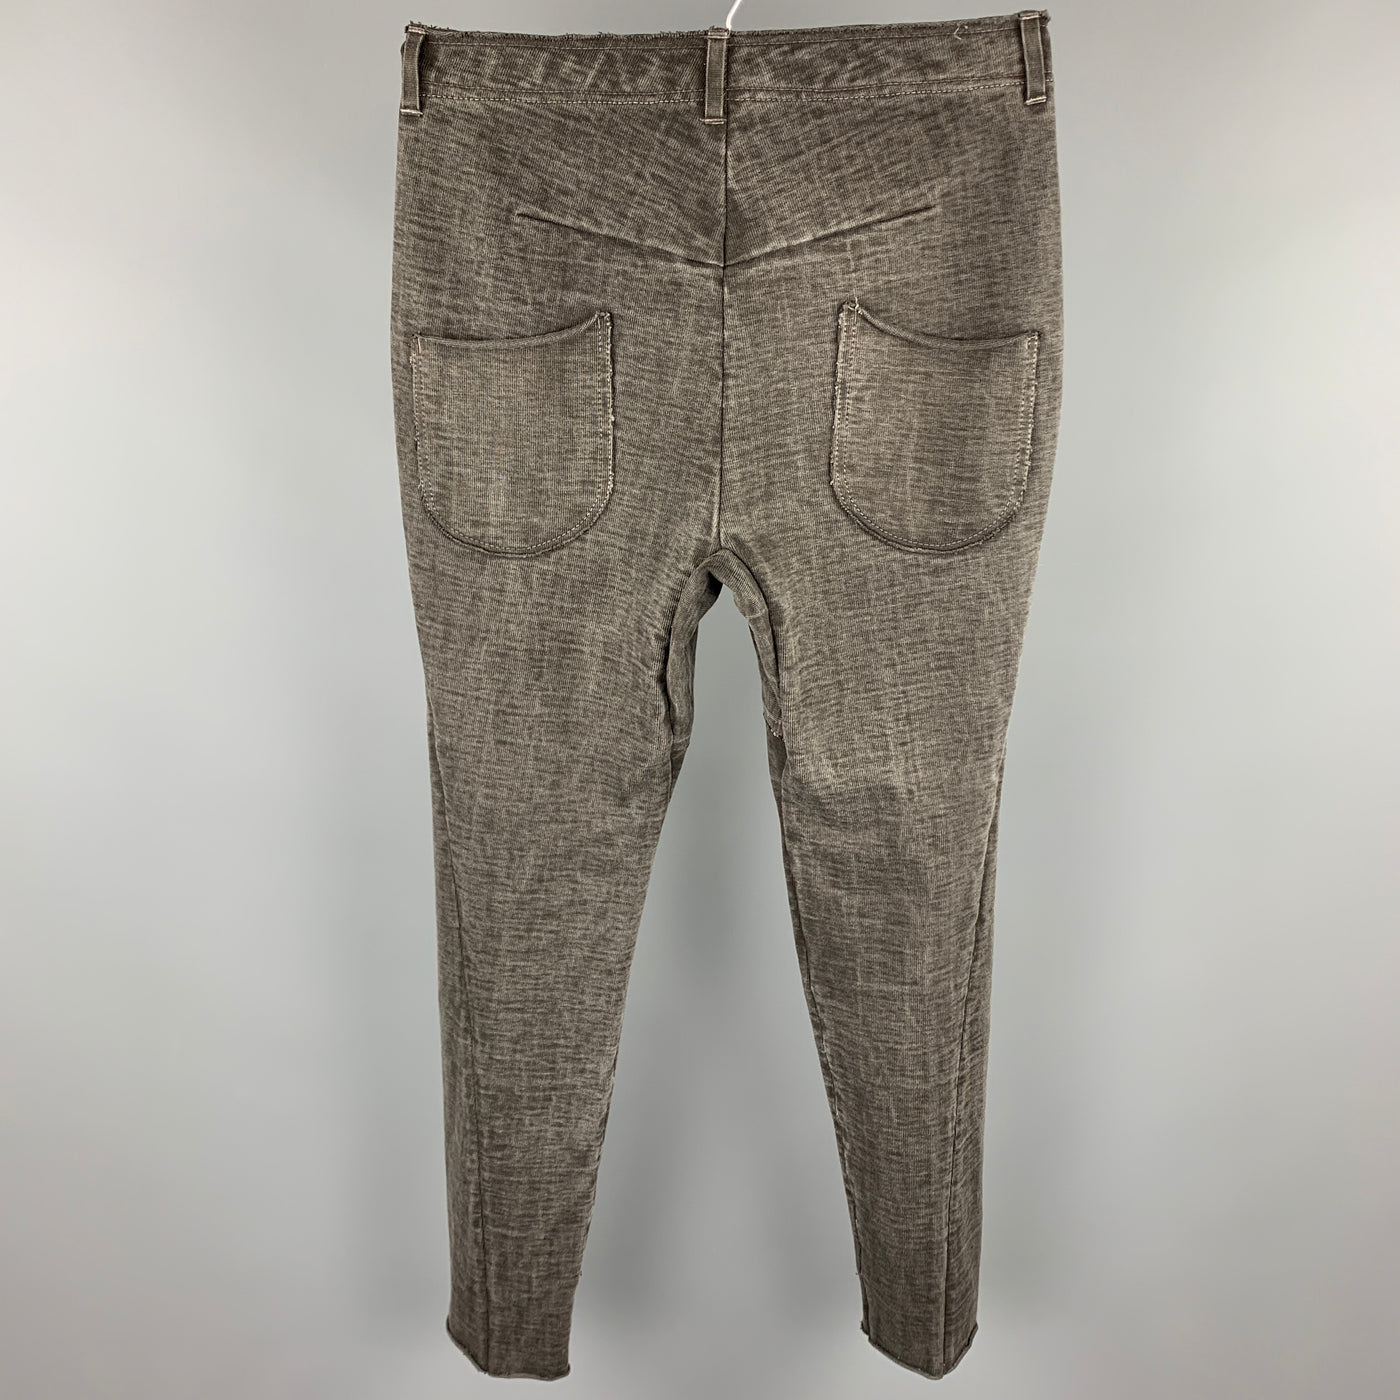 THE VIRIDI-ANNE Size 32 Charcoal Washed Cotton Asymmetrical Casual Pants